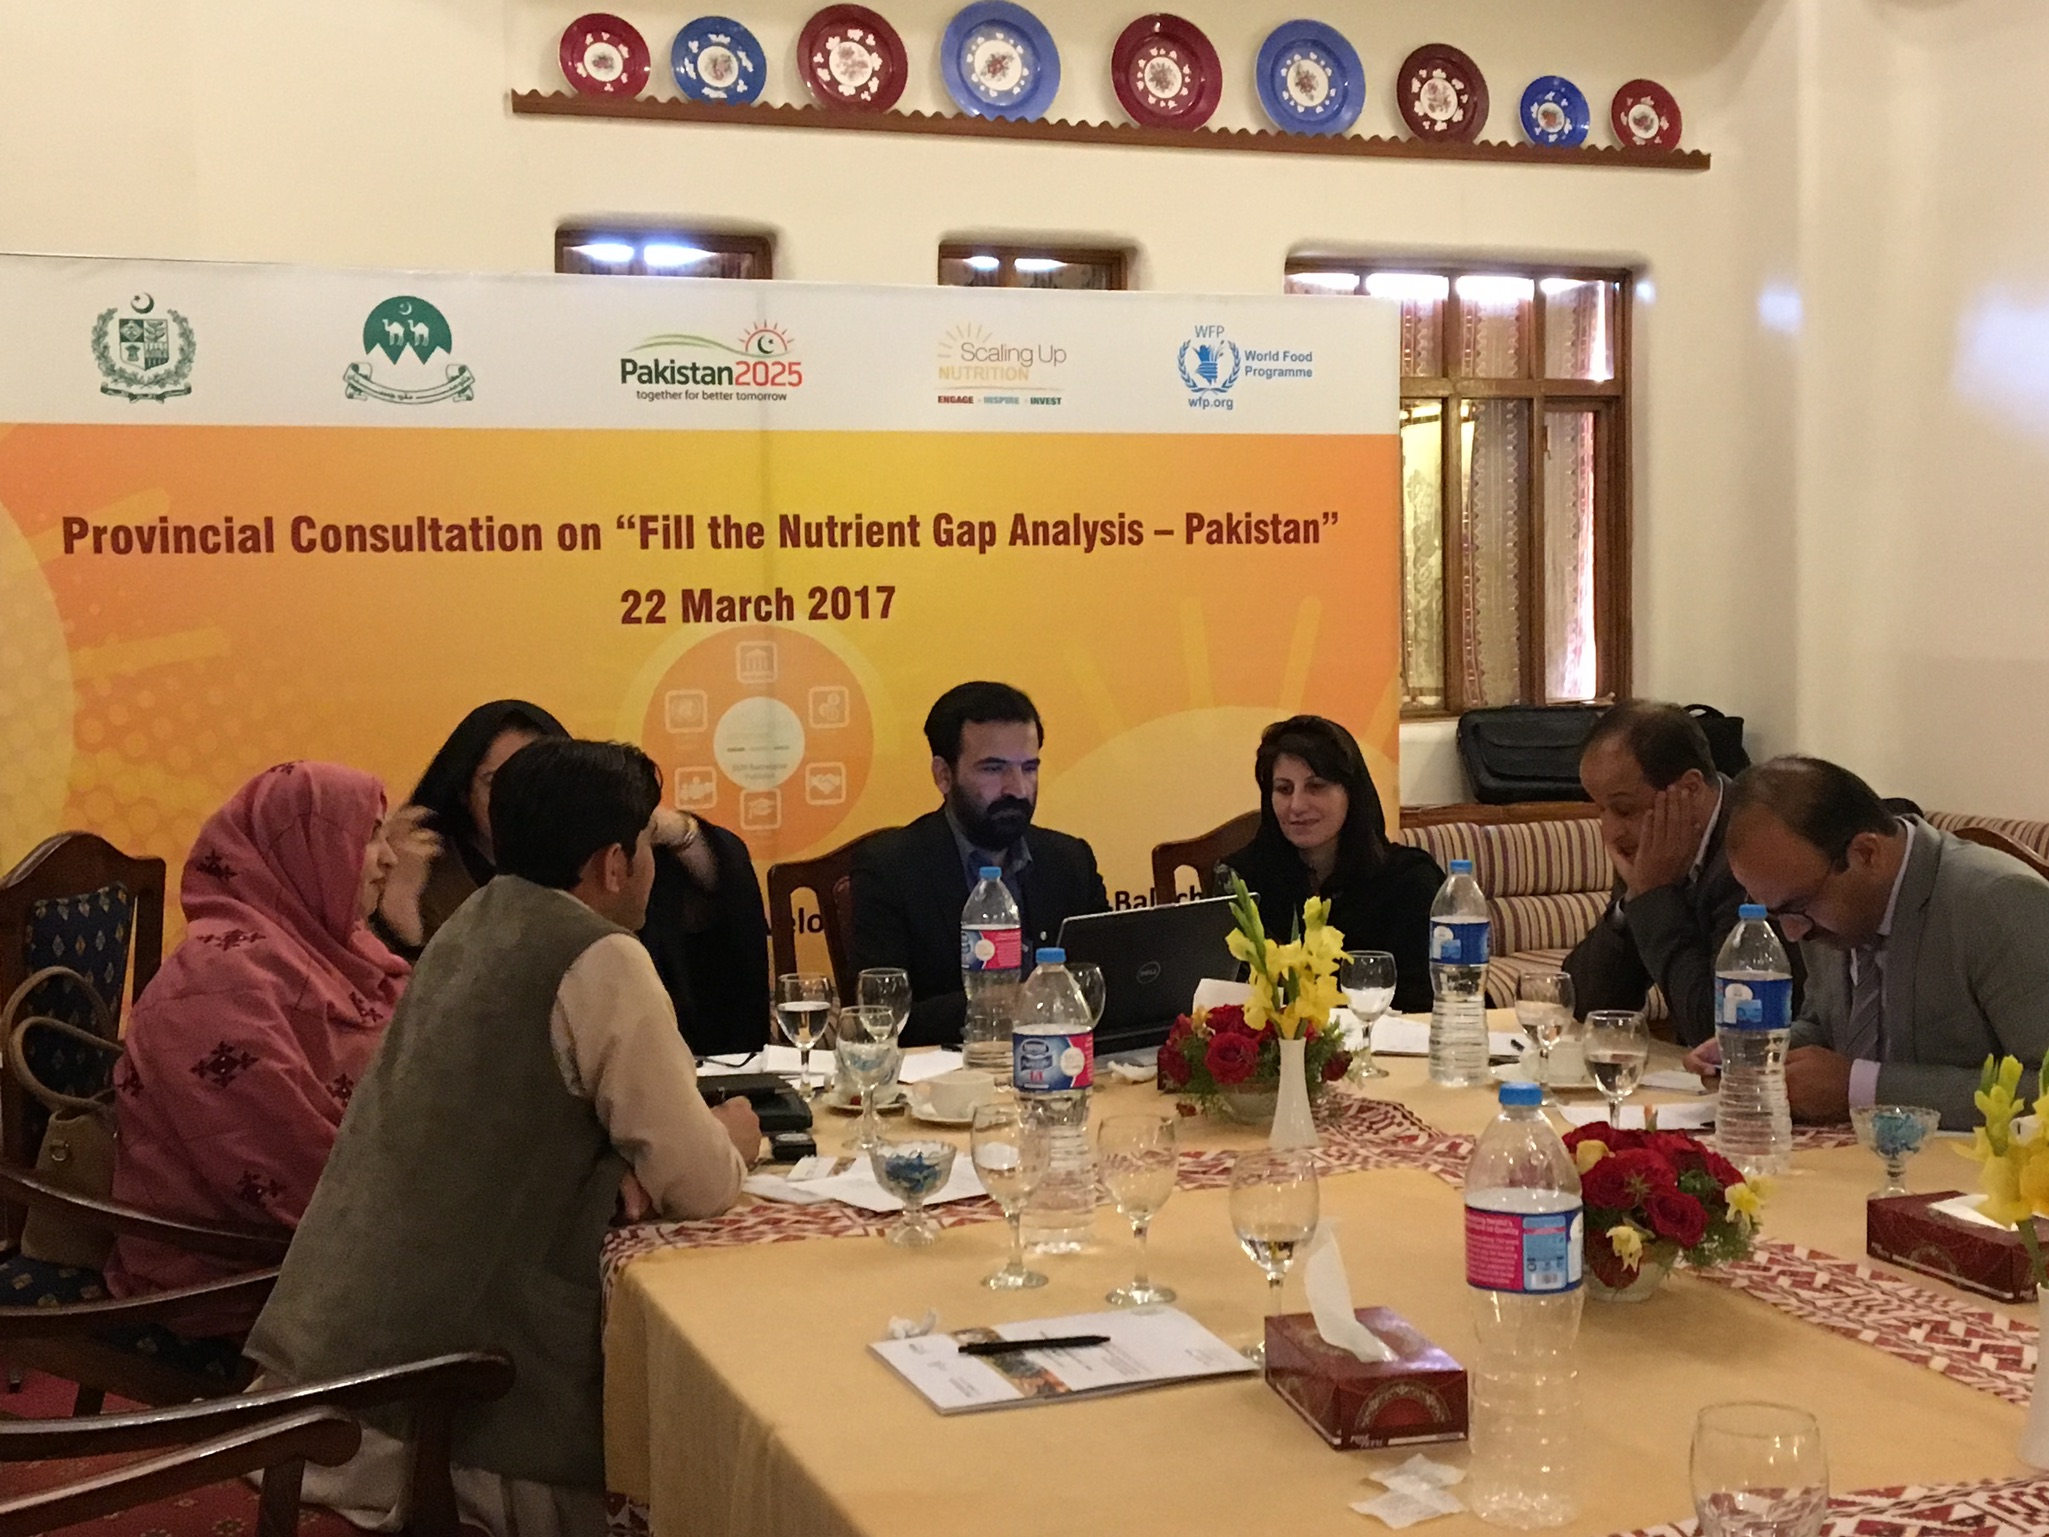 Representatives from the education sector discuss prioritisation of interventions to improve nutrition at the Balochistan Province FNG workshop in Quetta 